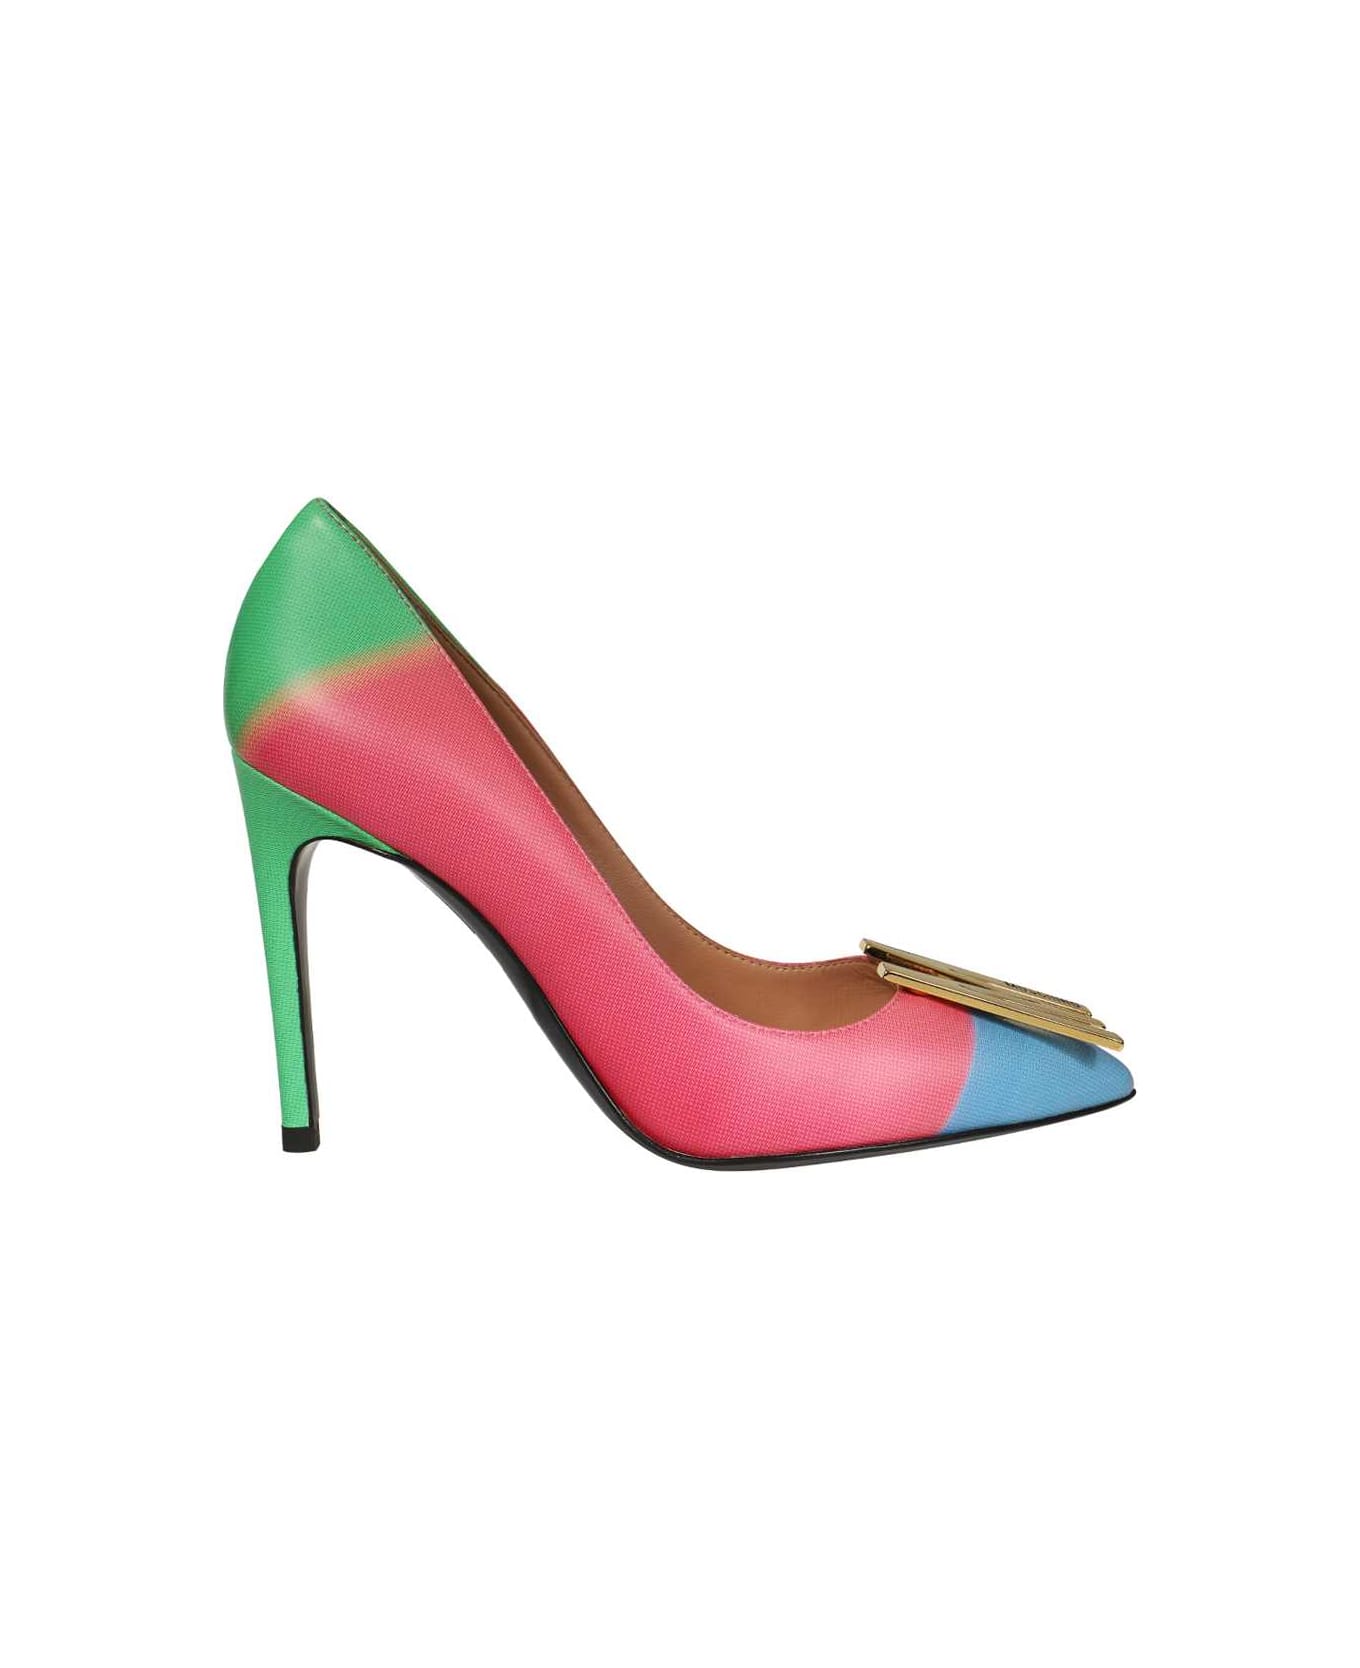 Moschino Leather Pumps - Multicolor ハイヒール